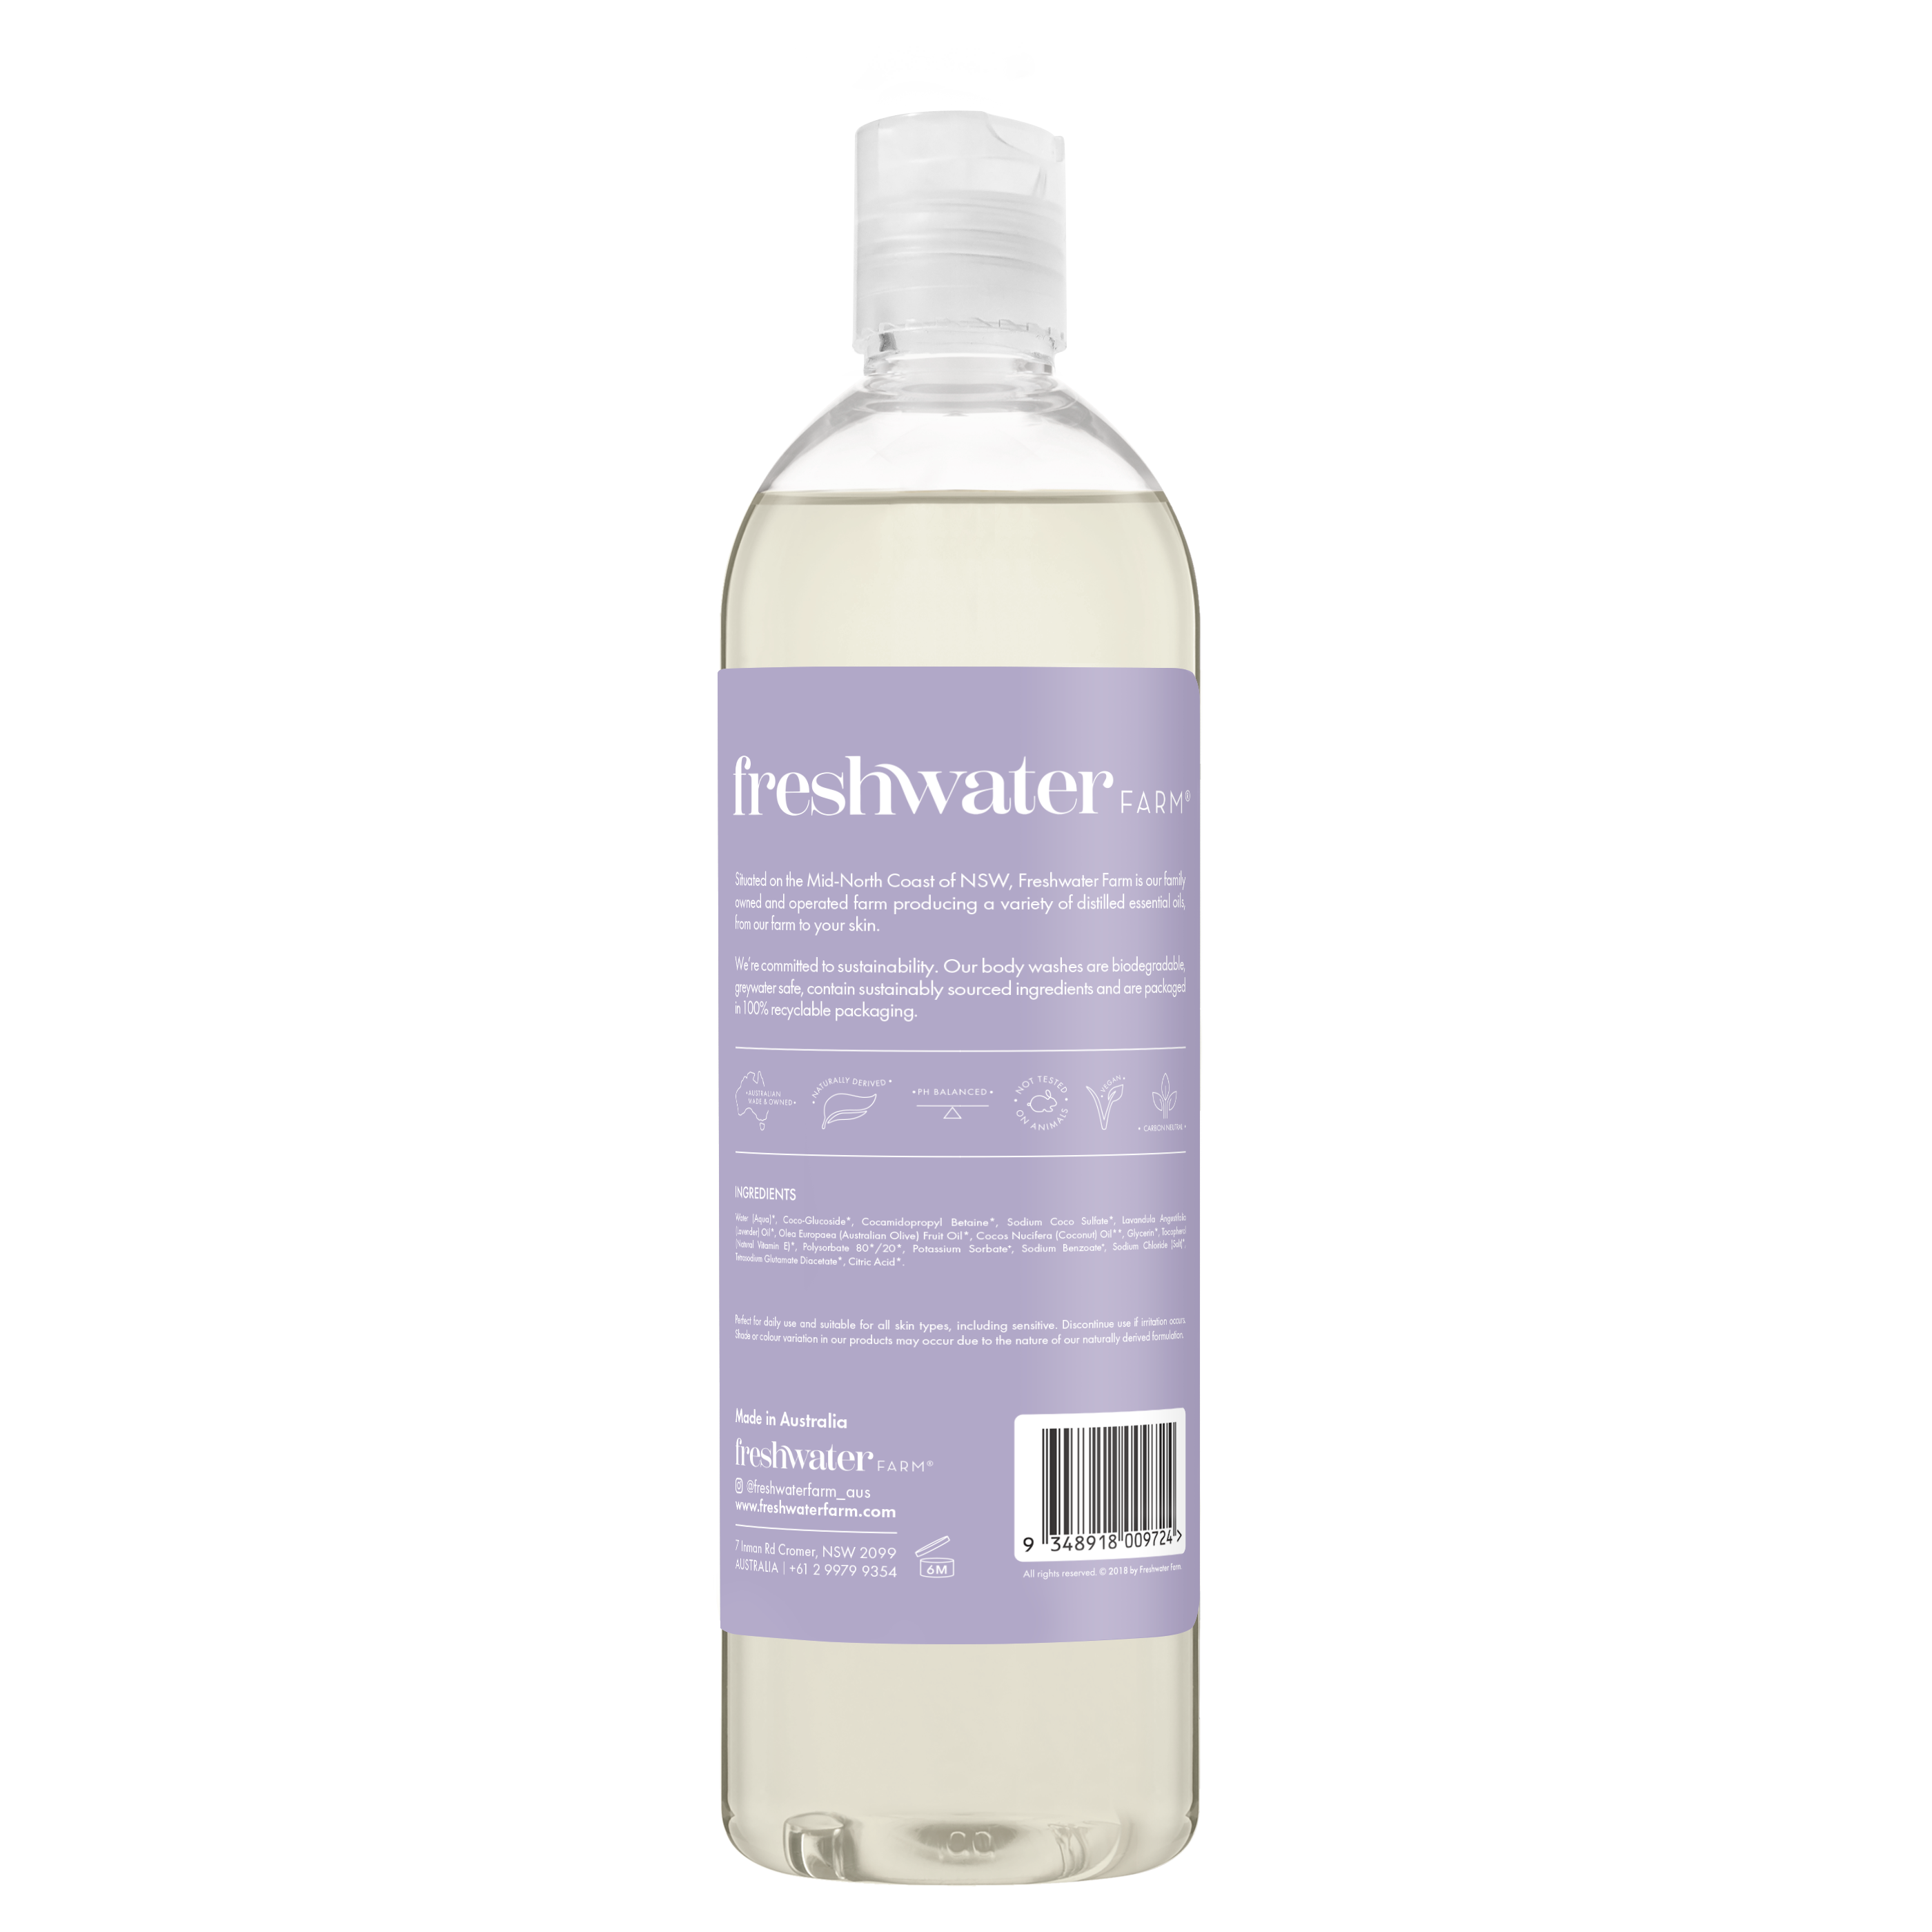 BODY WASH | Relaxing Lavender Oil 500ml